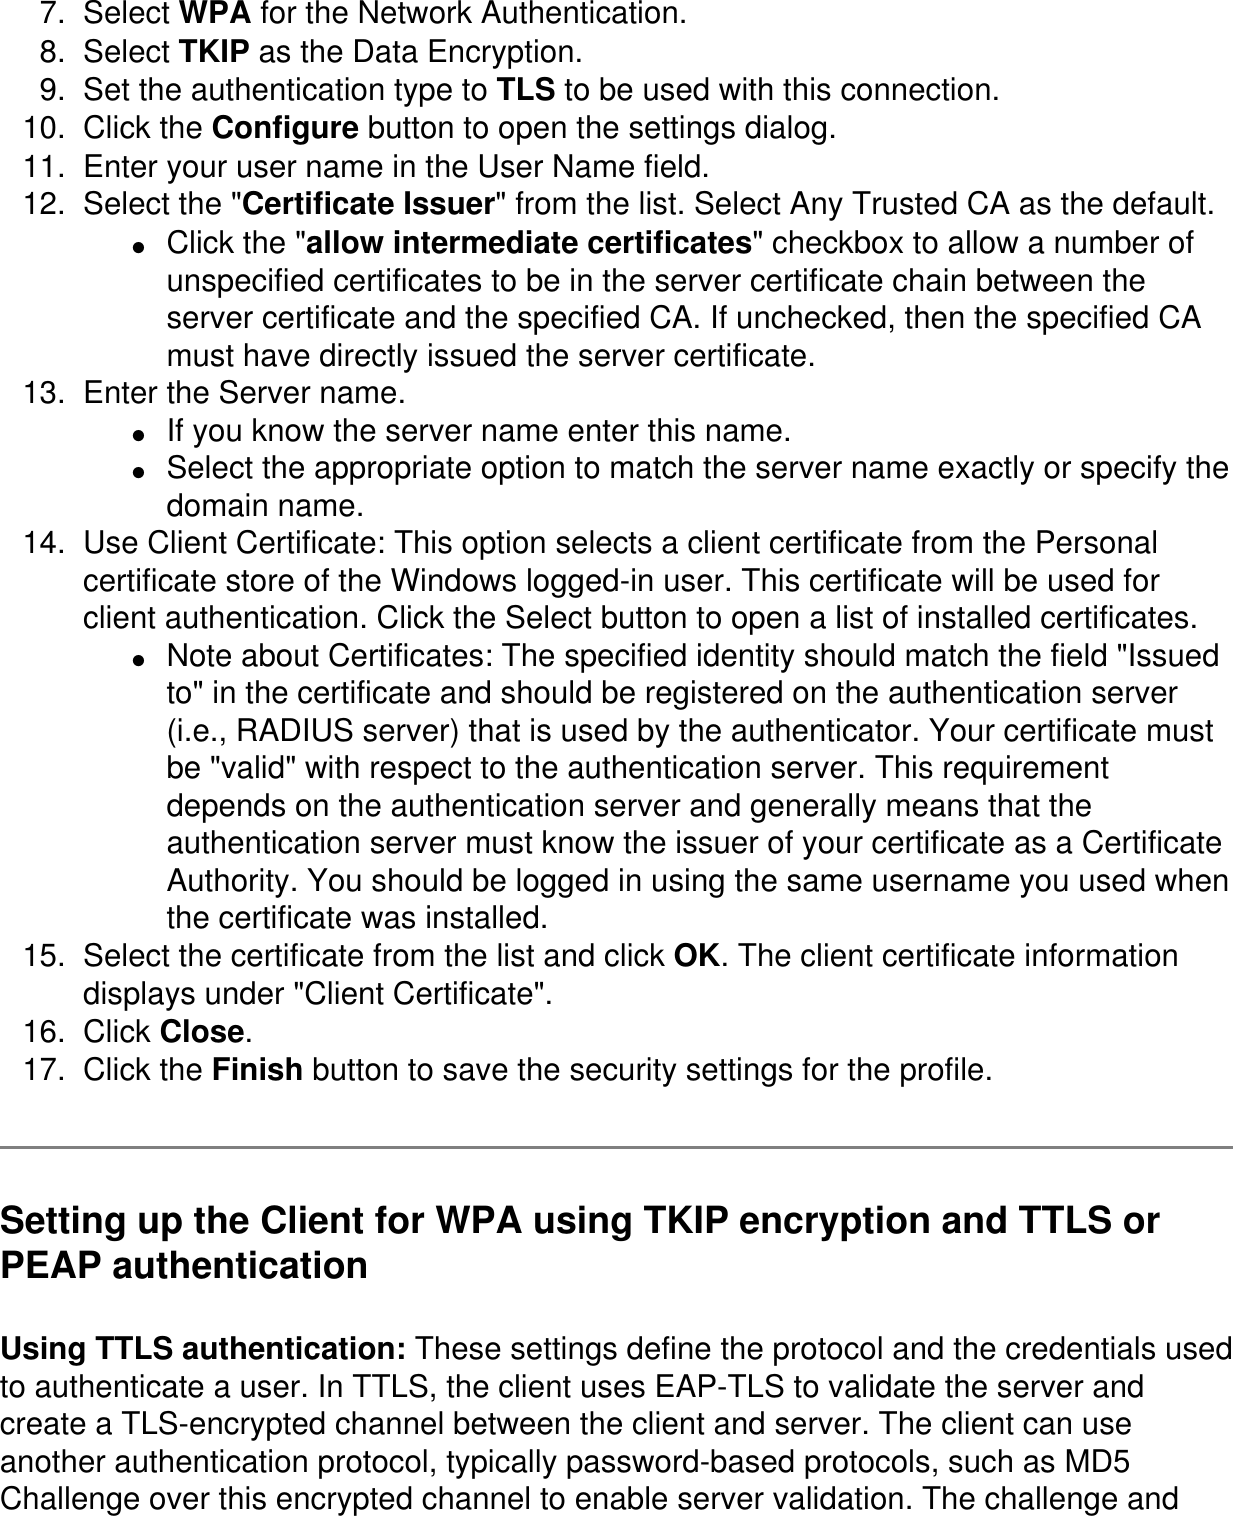 7.  Select WPA for the Network Authentication. 8.  Select TKIP as the Data Encryption. 9.  Set the authentication type to TLS to be used with this connection. 10.  Click the Configure button to open the settings dialog. 11.  Enter your user name in the User Name field. 12.  Select the &quot;Certificate Issuer&quot; from the list. Select Any Trusted CA as the default. ●     Click the &quot;allow intermediate certificates&quot; checkbox to allow a number of unspecified certificates to be in the server certificate chain between the server certificate and the specified CA. If unchecked, then the specified CA must have directly issued the server certificate. 13.  Enter the Server name. ●     If you know the server name enter this name. ●     Select the appropriate option to match the server name exactly or specify the domain name. 14.  Use Client Certificate: This option selects a client certificate from the Personal certificate store of the Windows logged-in user. This certificate will be used for client authentication. Click the Select button to open a list of installed certificates. ●     Note about Certificates: The specified identity should match the field &quot;Issued to&quot; in the certificate and should be registered on the authentication server (i.e., RADIUS server) that is used by the authenticator. Your certificate must be &quot;valid&quot; with respect to the authentication server. This requirement depends on the authentication server and generally means that the authentication server must know the issuer of your certificate as a Certificate Authority. You should be logged in using the same username you used when the certificate was installed. 15.  Select the certificate from the list and click OK. The client certificate information displays under &quot;Client Certificate&quot;. 16.  Click Close. 17.  Click the Finish button to save the security settings for the profile. Setting up the Client for WPA using TKIP encryption and TTLS or PEAP authenticationUsing TTLS authentication: These settings define the protocol and the credentials used to authenticate a user. In TTLS, the client uses EAP-TLS to validate the server and create a TLS-encrypted channel between the client and server. The client can use another authentication protocol, typically password-based protocols, such as MD5 Challenge over this encrypted channel to enable server validation. The challenge and 